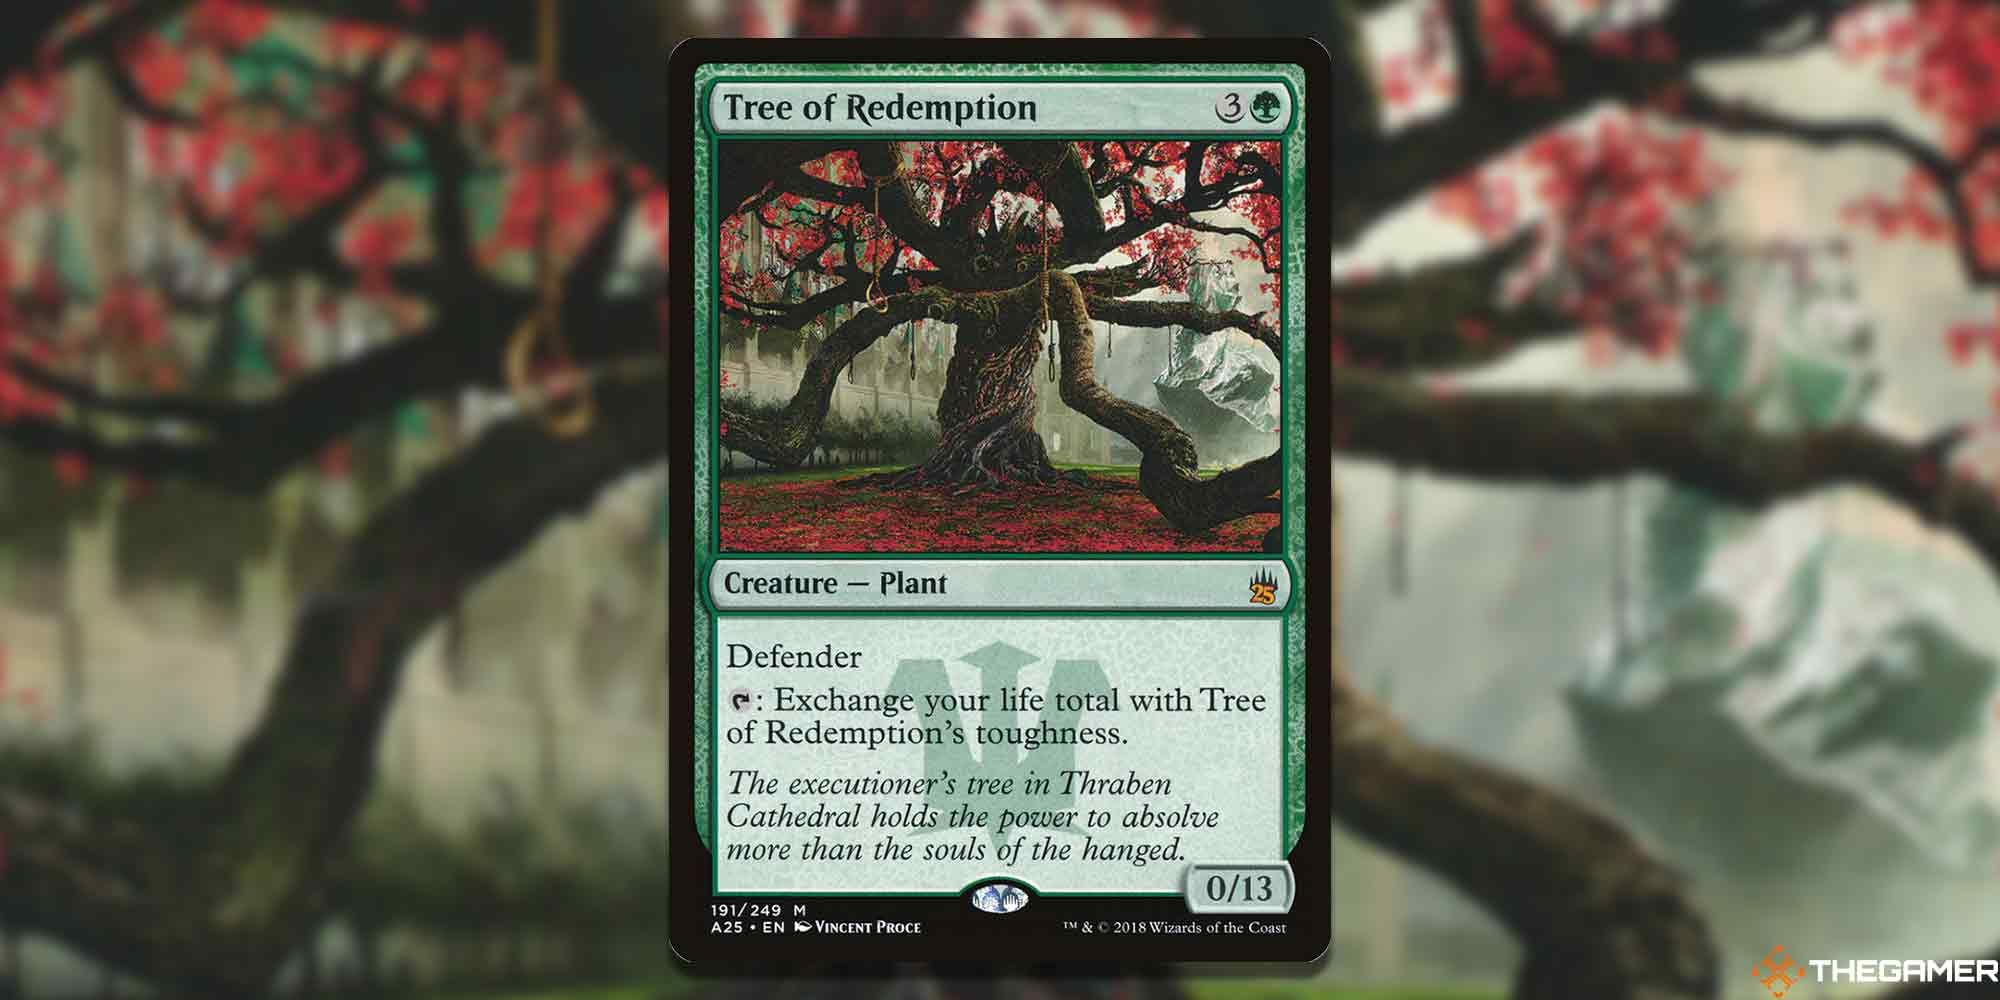 Tree Of Redemption card from mtg